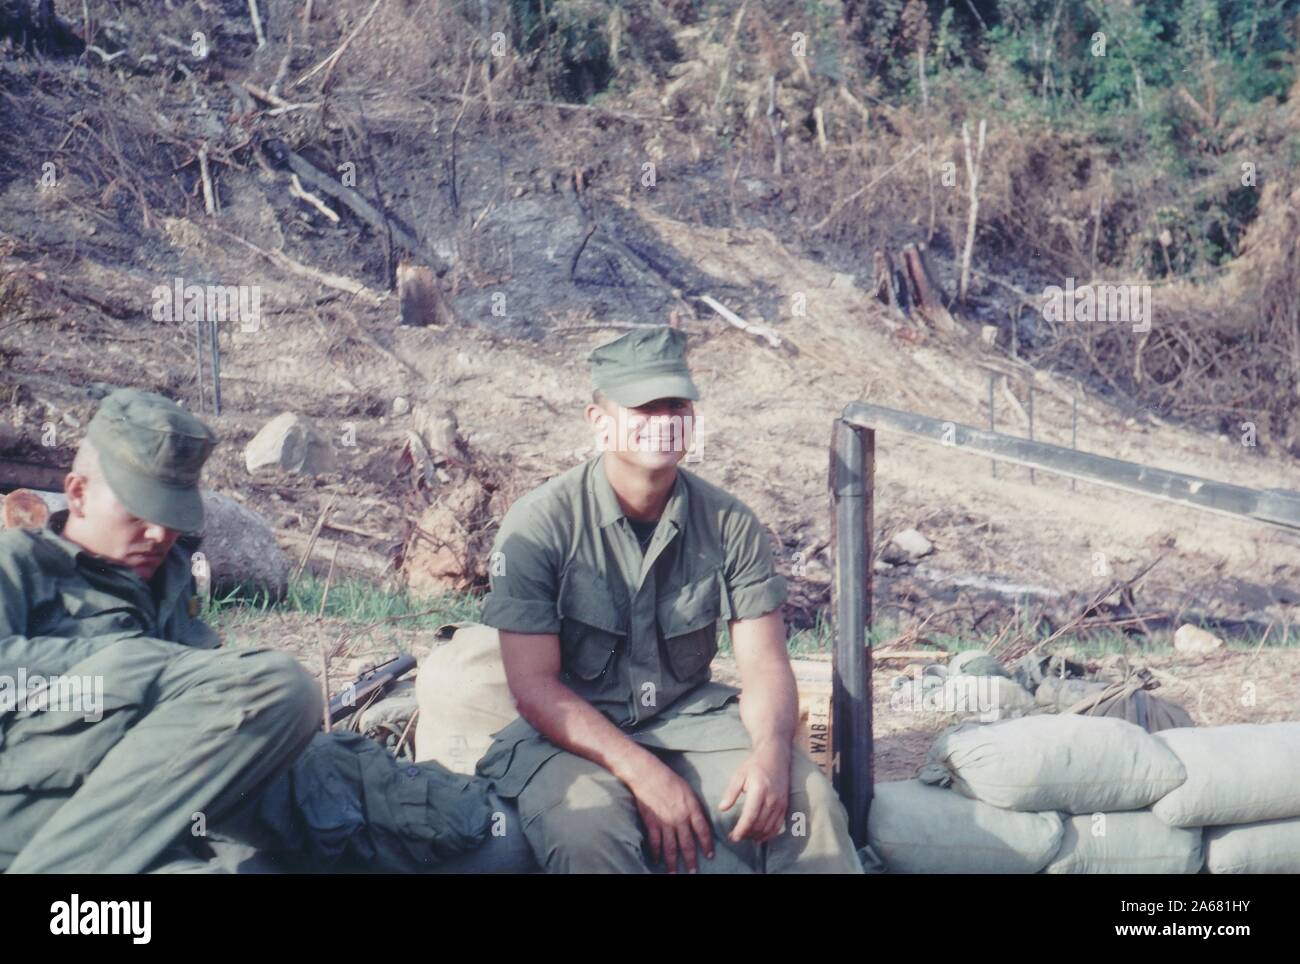 Two American servicemen outside on a sunny day, one reclining and looking down, the other sitting on sandbags and smiling, with charred underbrush in the background, Vietnam, 1965. () Stock Photo